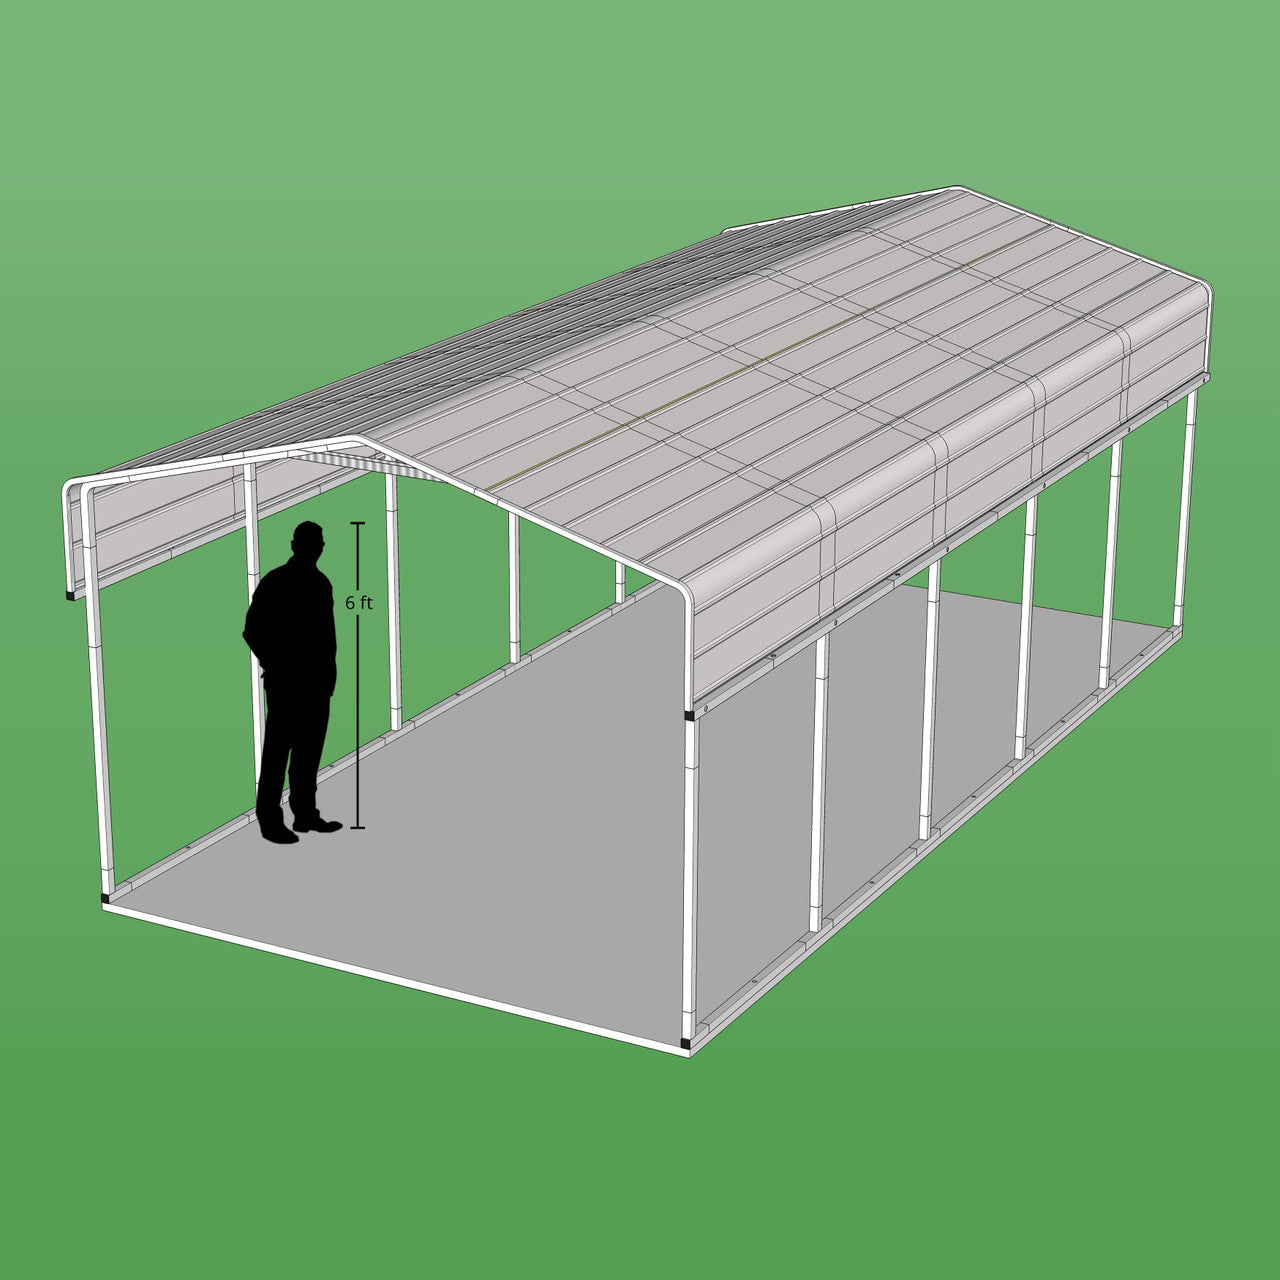 Aleko 12W x 25L x 10H ft. Metal Carport with Corrugated Roof Panels – Gray CPM12X23GY-AP - Serenity Provision